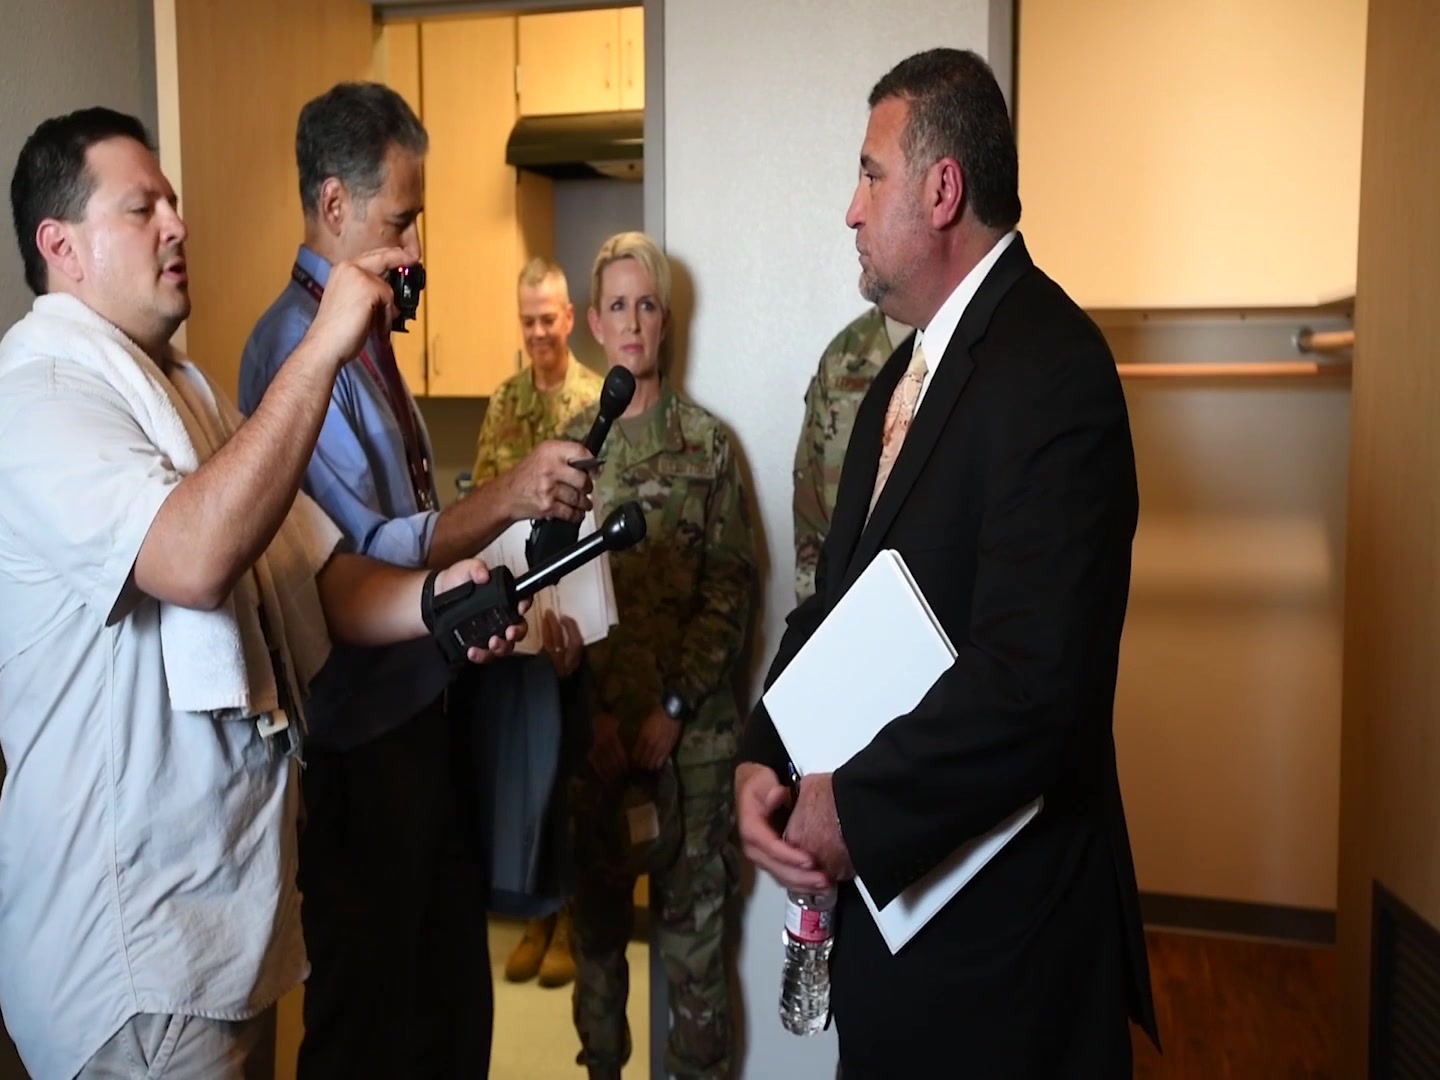 During a press conference held Aug. 1, 2019 at Joint Base San Antonio-Lackland, Texas, Brig. Gen. Laura Lenderman, 502nd Air Base Wing and JBSA commander, stressed the command is committed to transparency and regaining the trust of residents. (Video courtesy / A1C Ryan Mancuso, 59th Medical Wing)